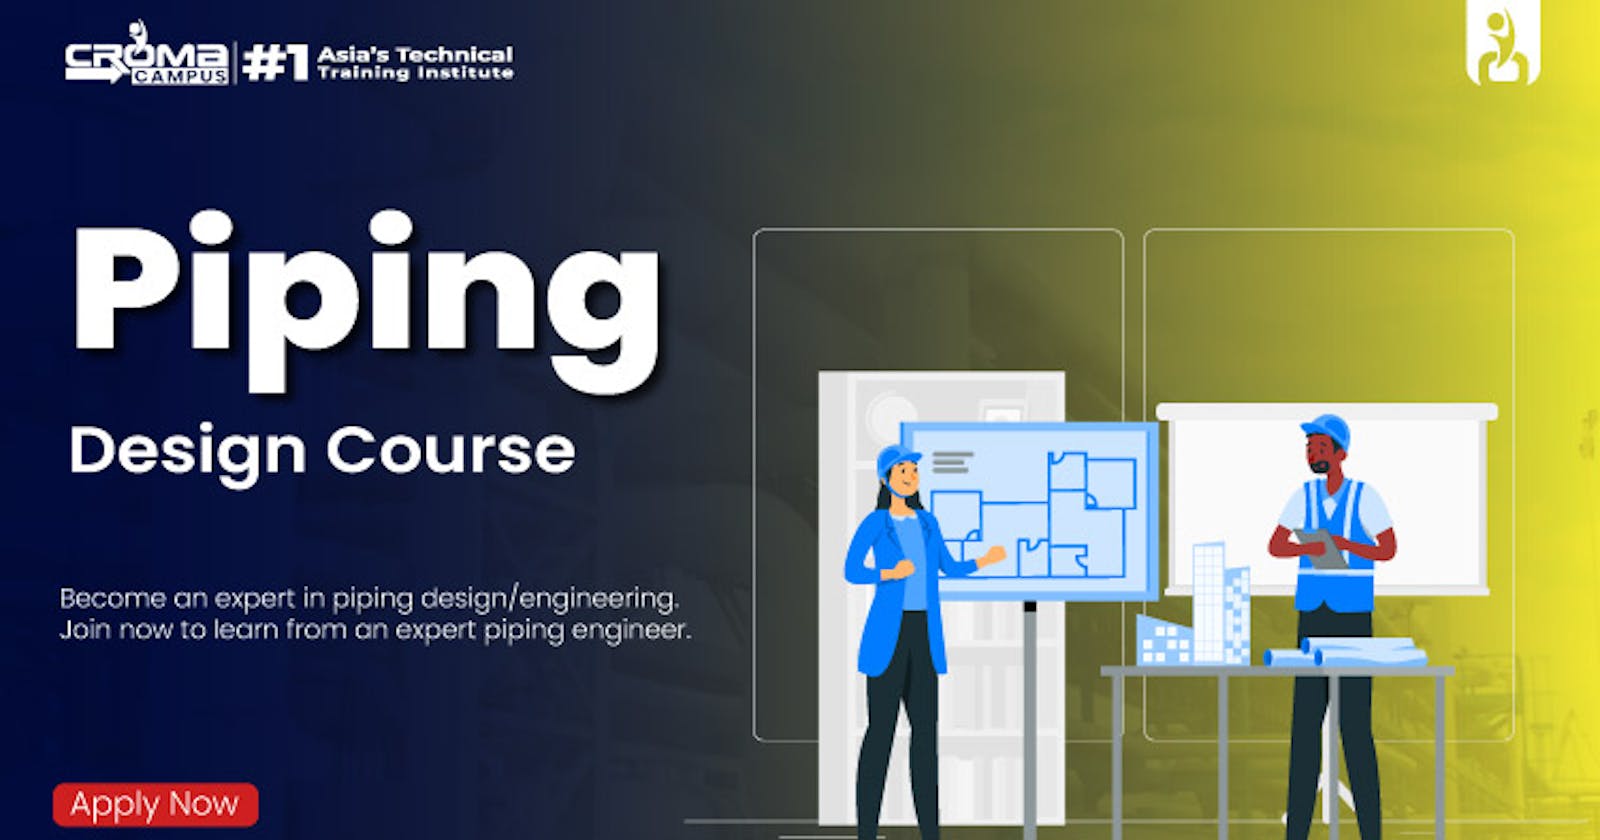 What Will I Learn in Piping Engineering Course?